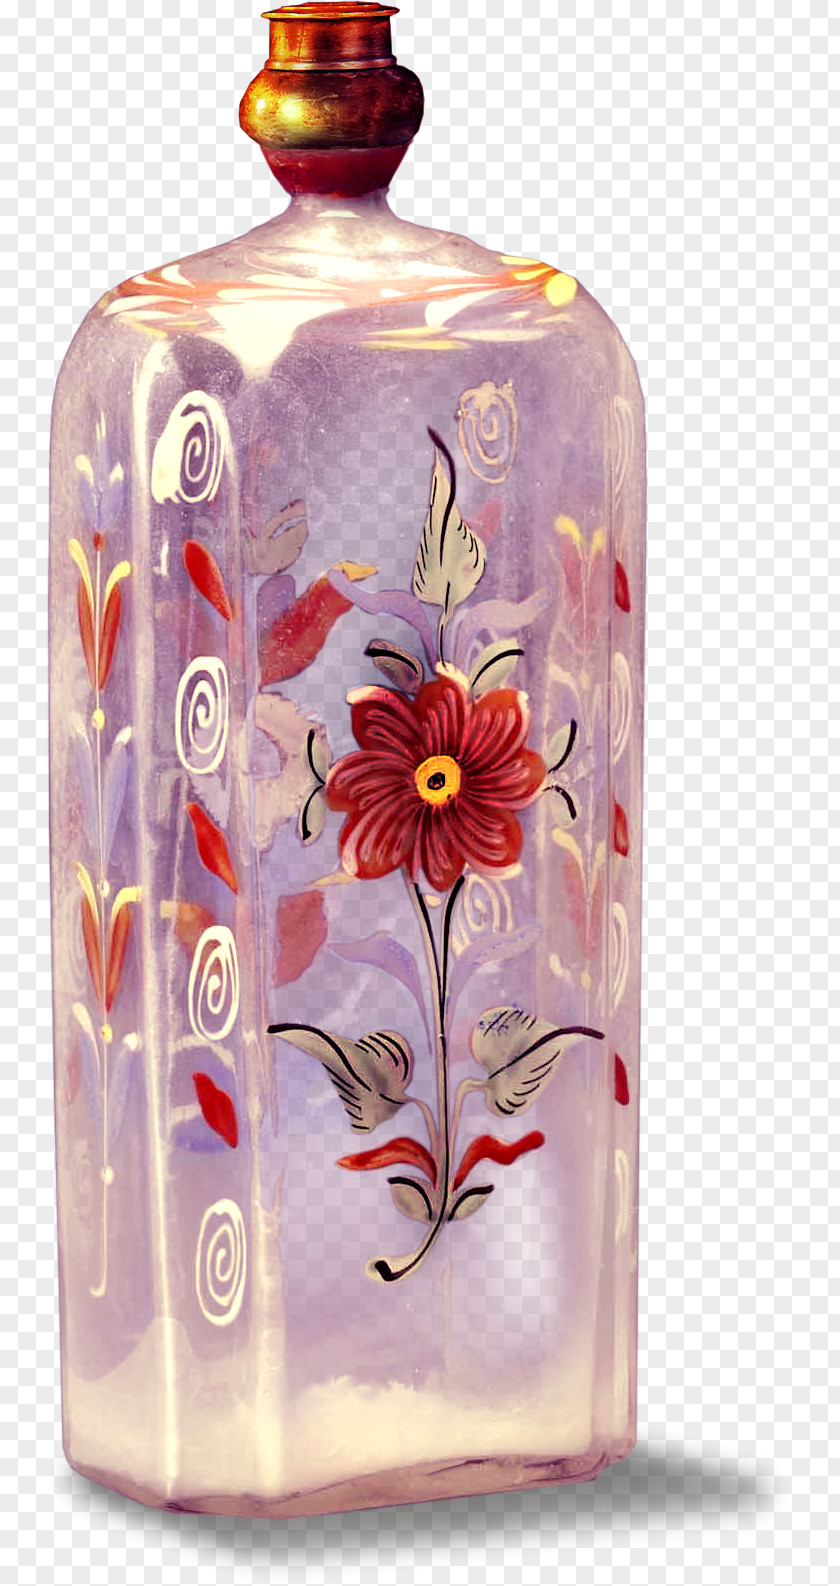 Exquisite Pattern Bottle Glass Transparency And Translucency PNG